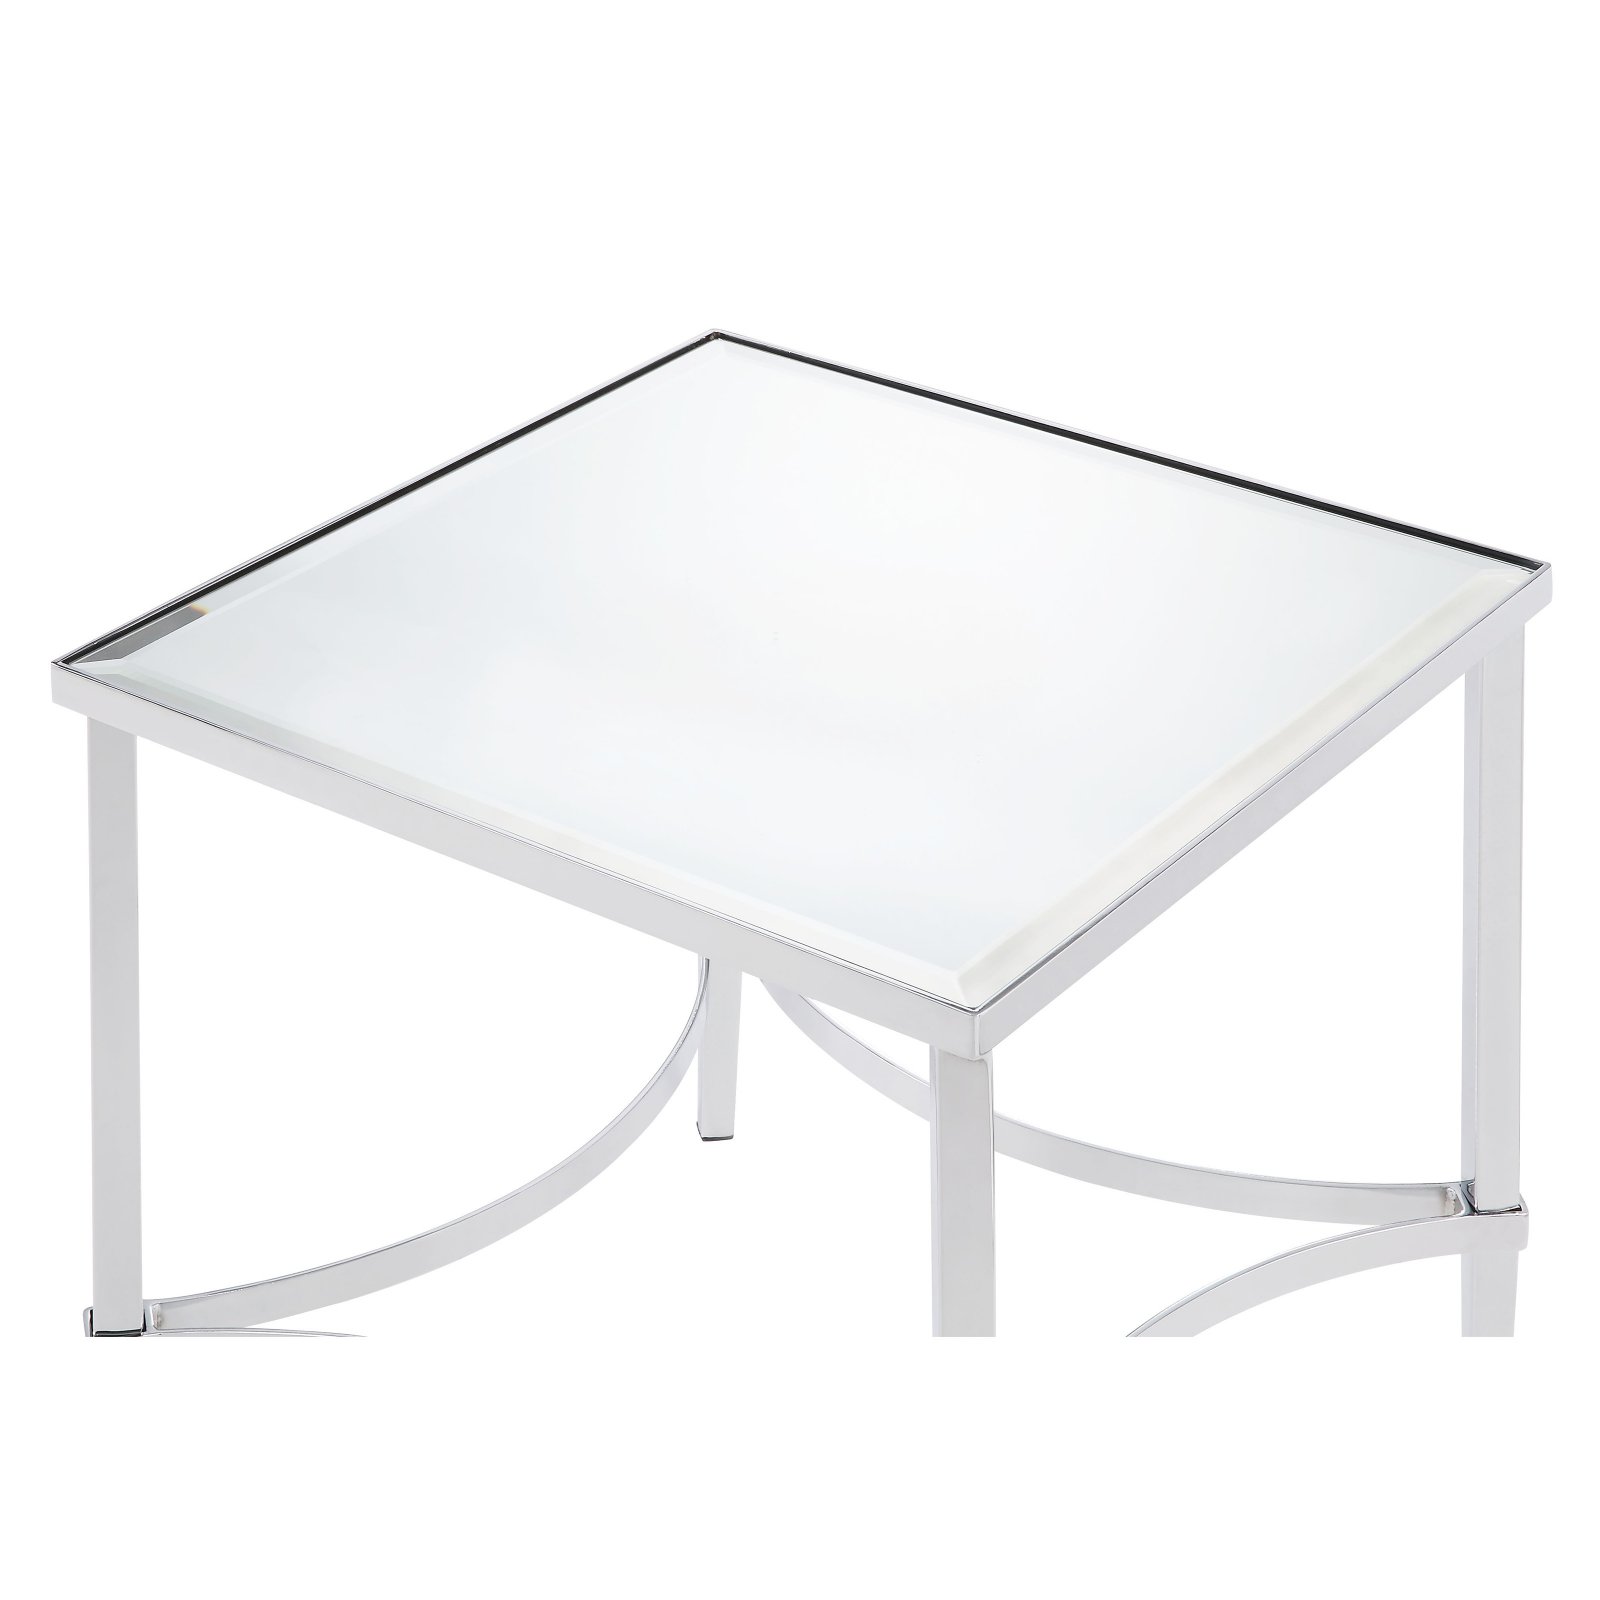 ACME 80192 Petunia End Table - Chrome & Mirror - 24 x 22 x 22 in. - image 3 of 4